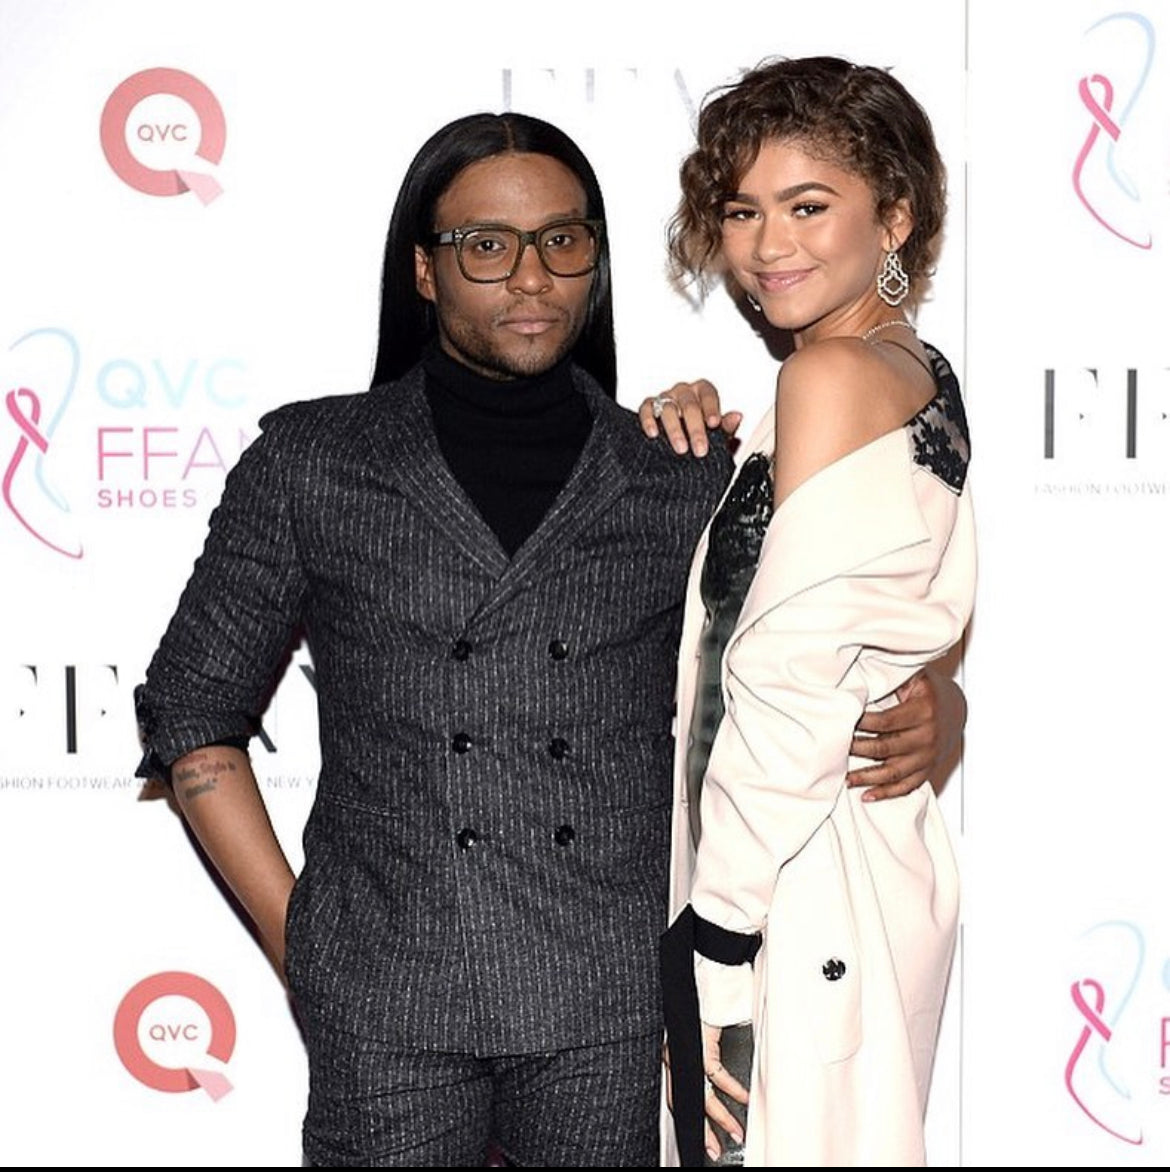 Celebrity stylist Law Roach with Zendaya at a event